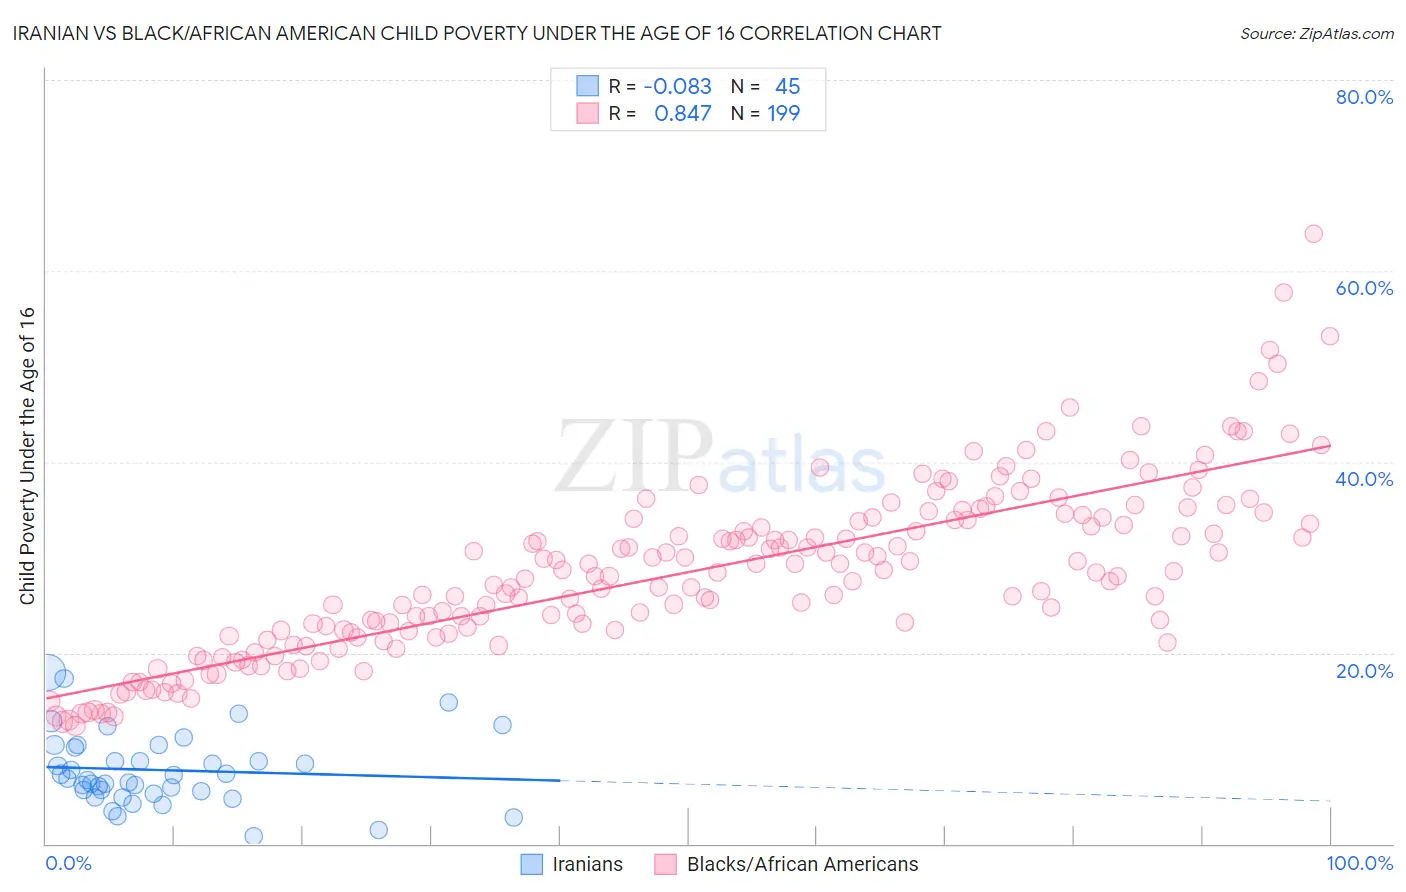 Iranian vs Black/African American Child Poverty Under the Age of 16